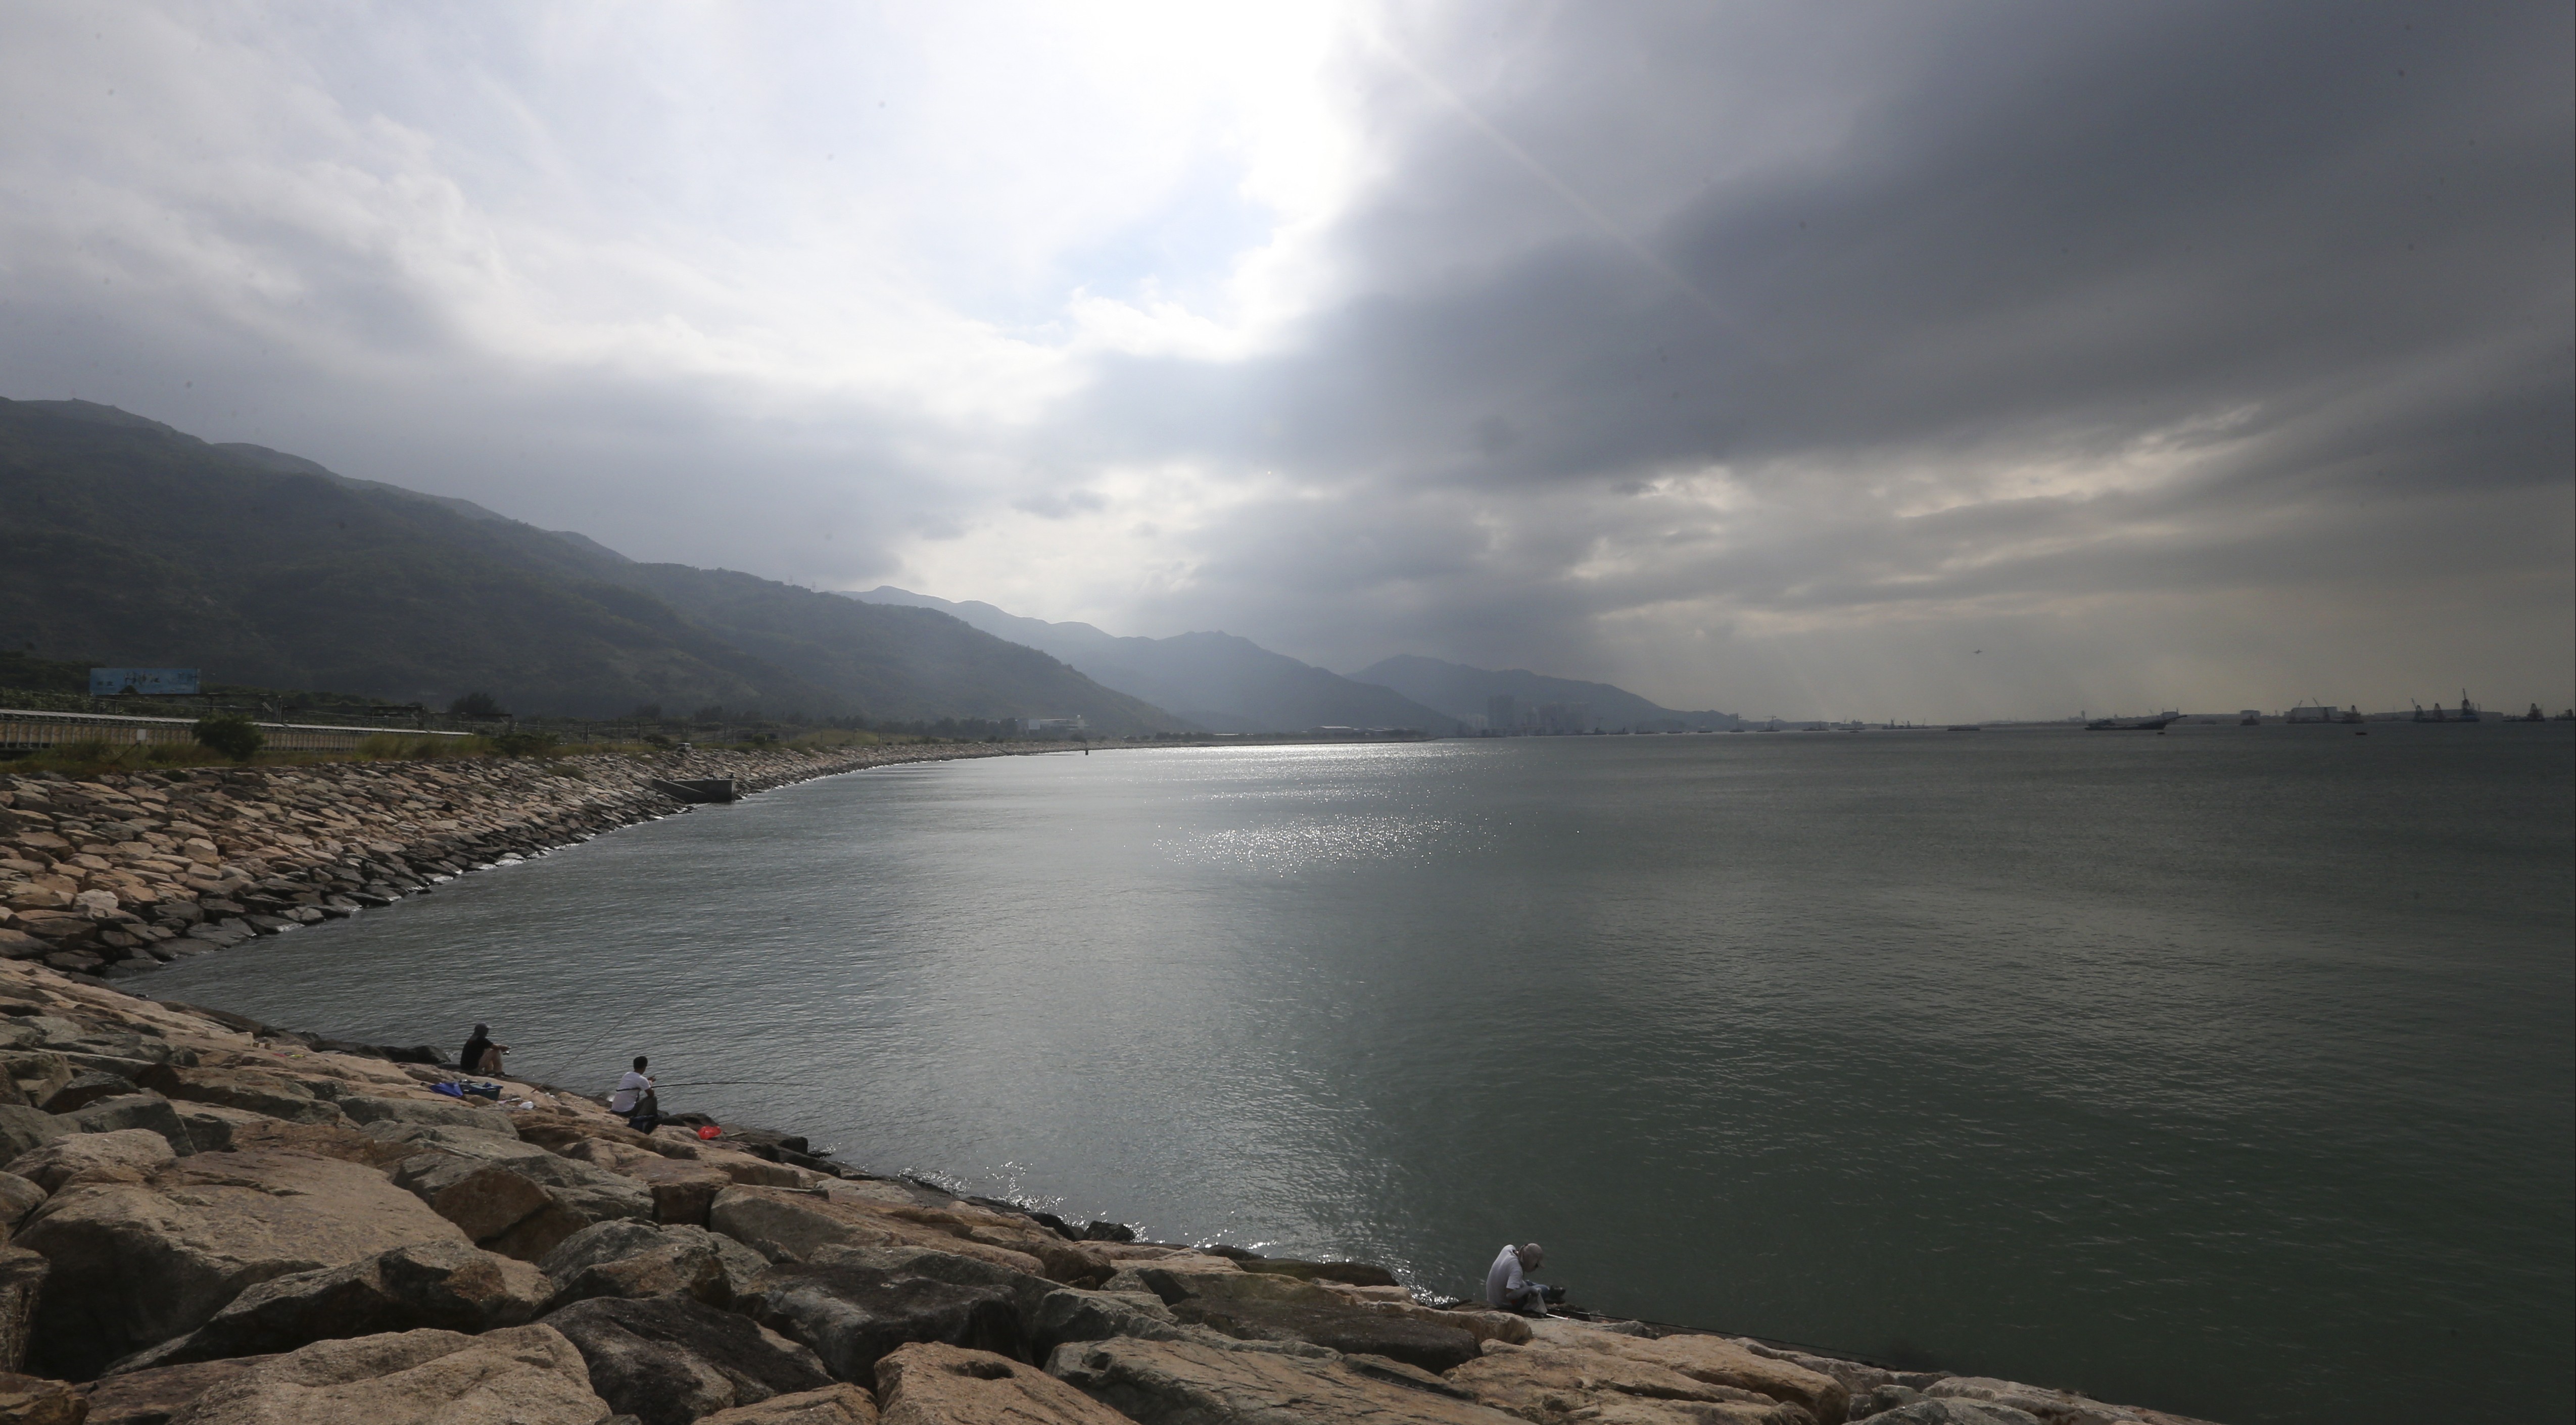 Hong Kong International Airport, which was built on reclaimed land, is seen from Sunny Bay on Lantau. Photo: Felix Wong